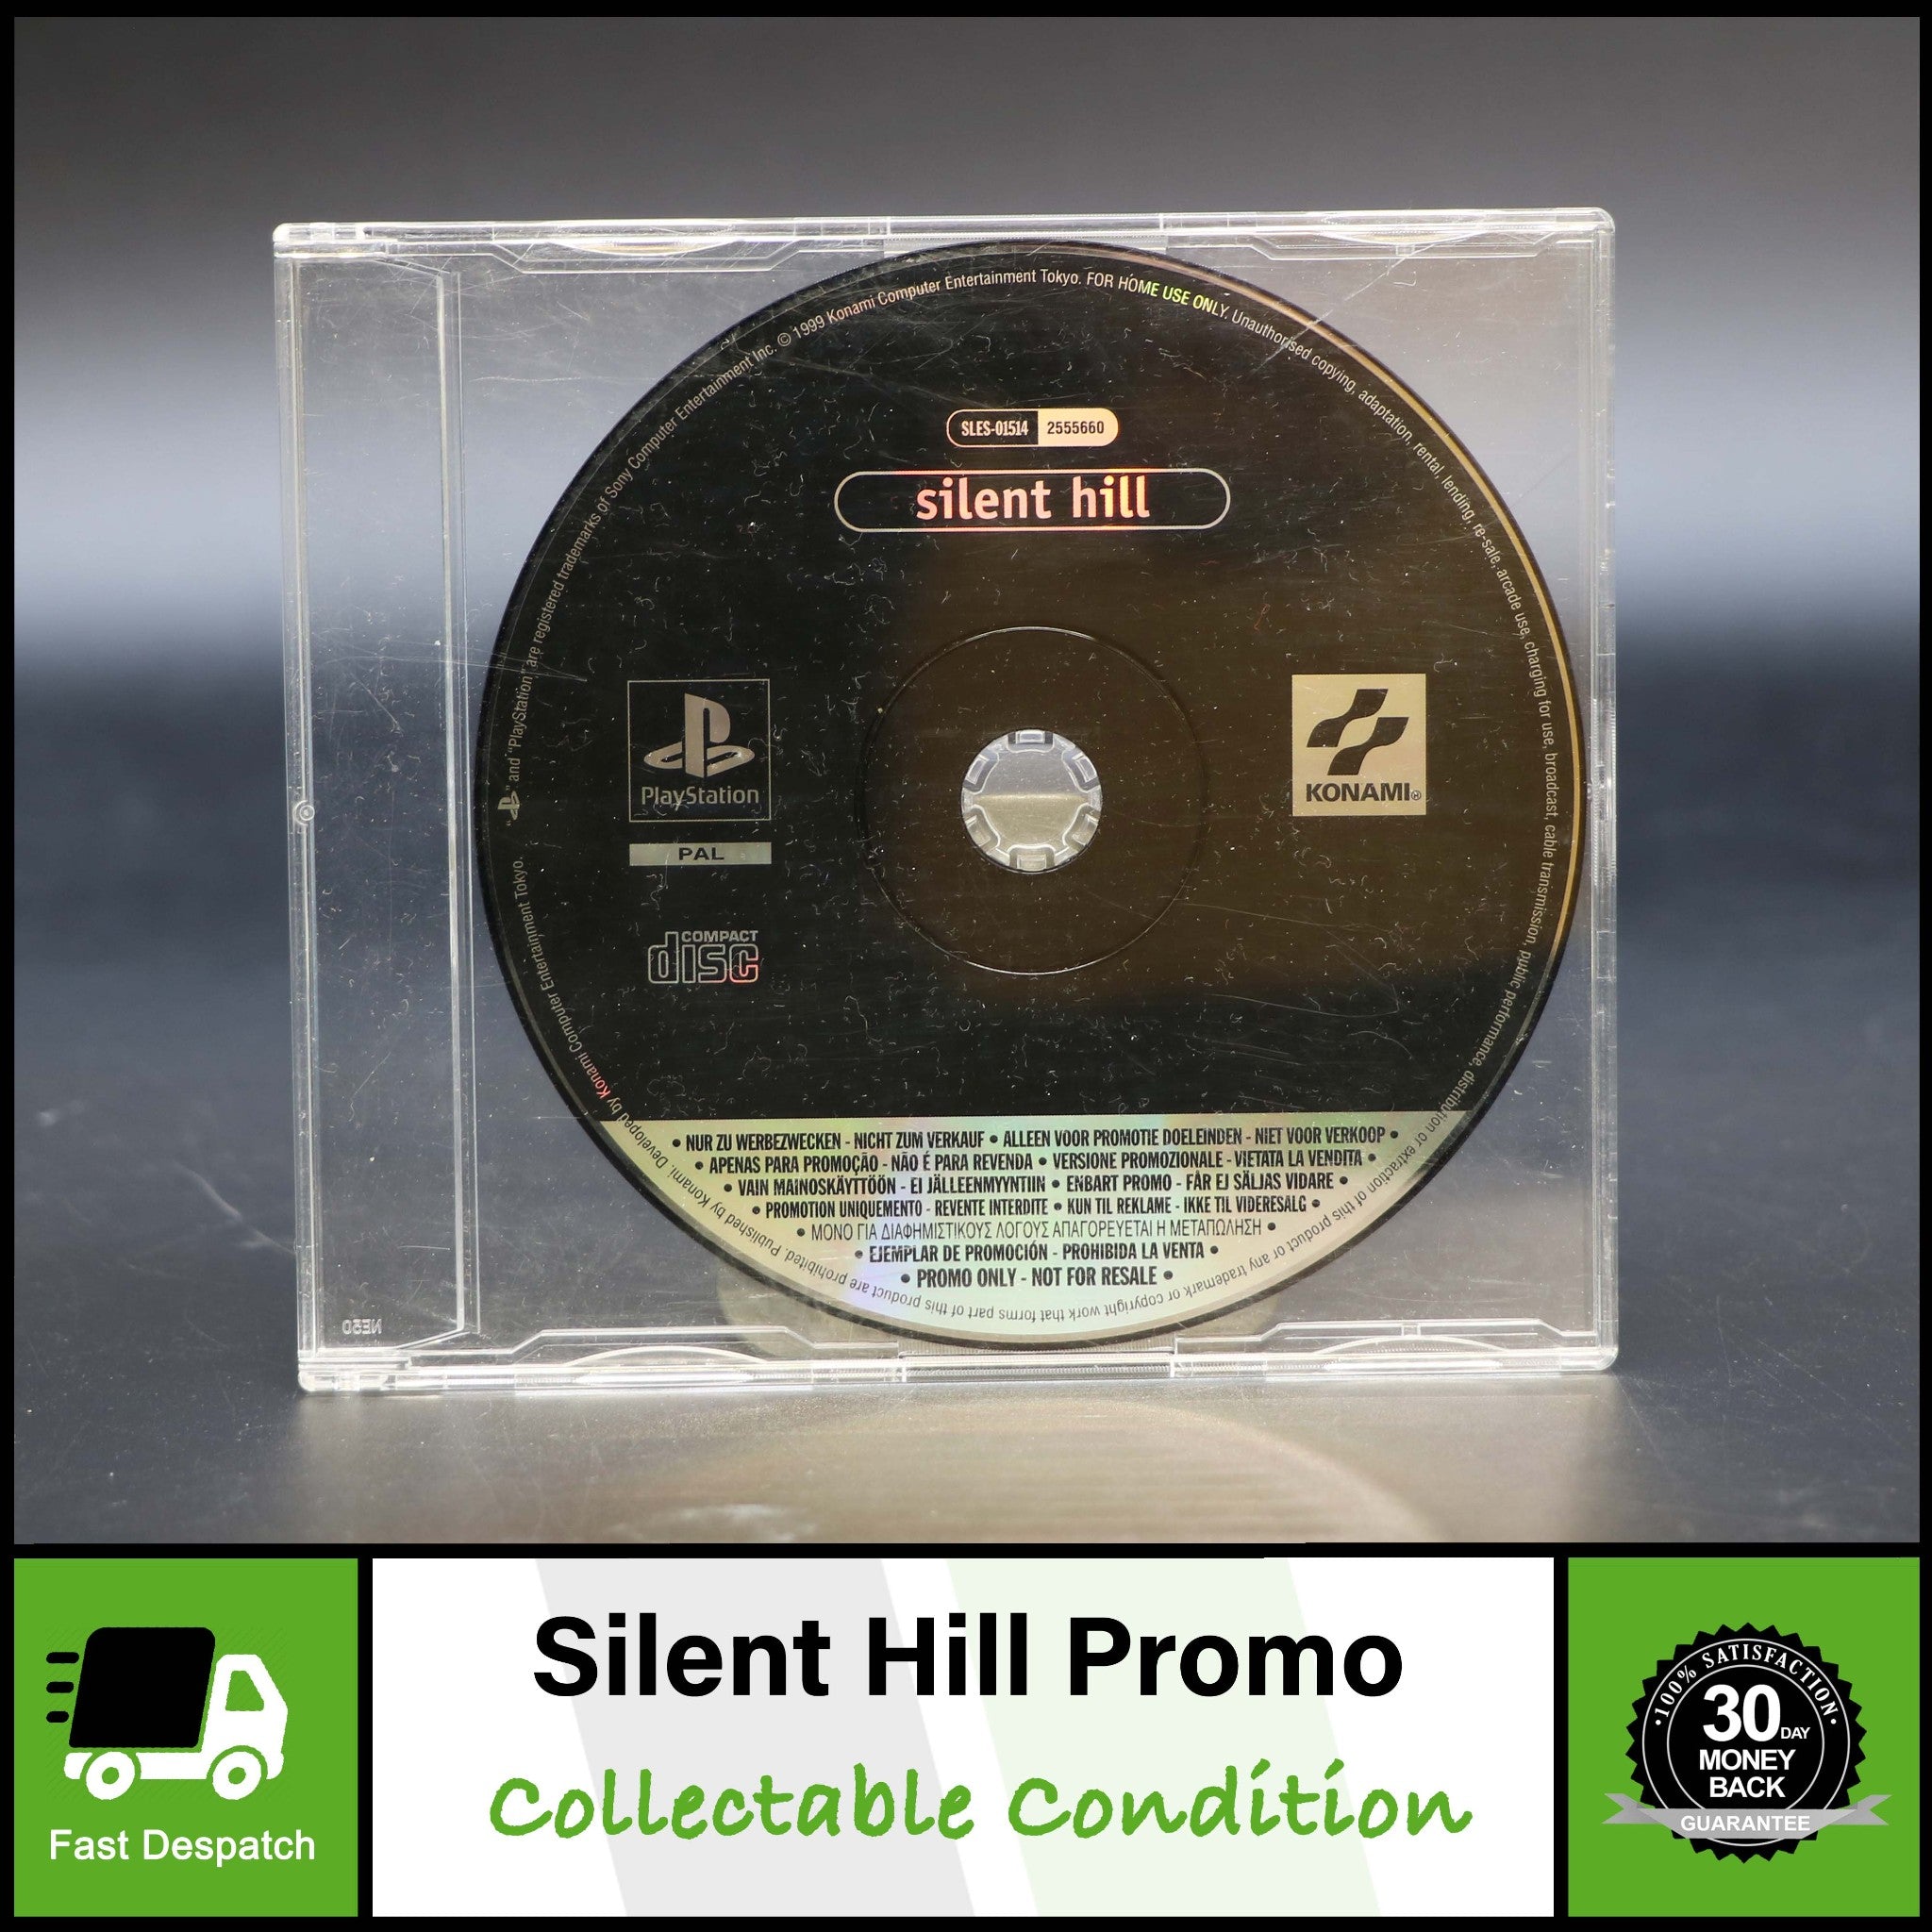 Silent Hill Promo | Sony PS1 Playstation PSOne Game | SLES-01514 Disc